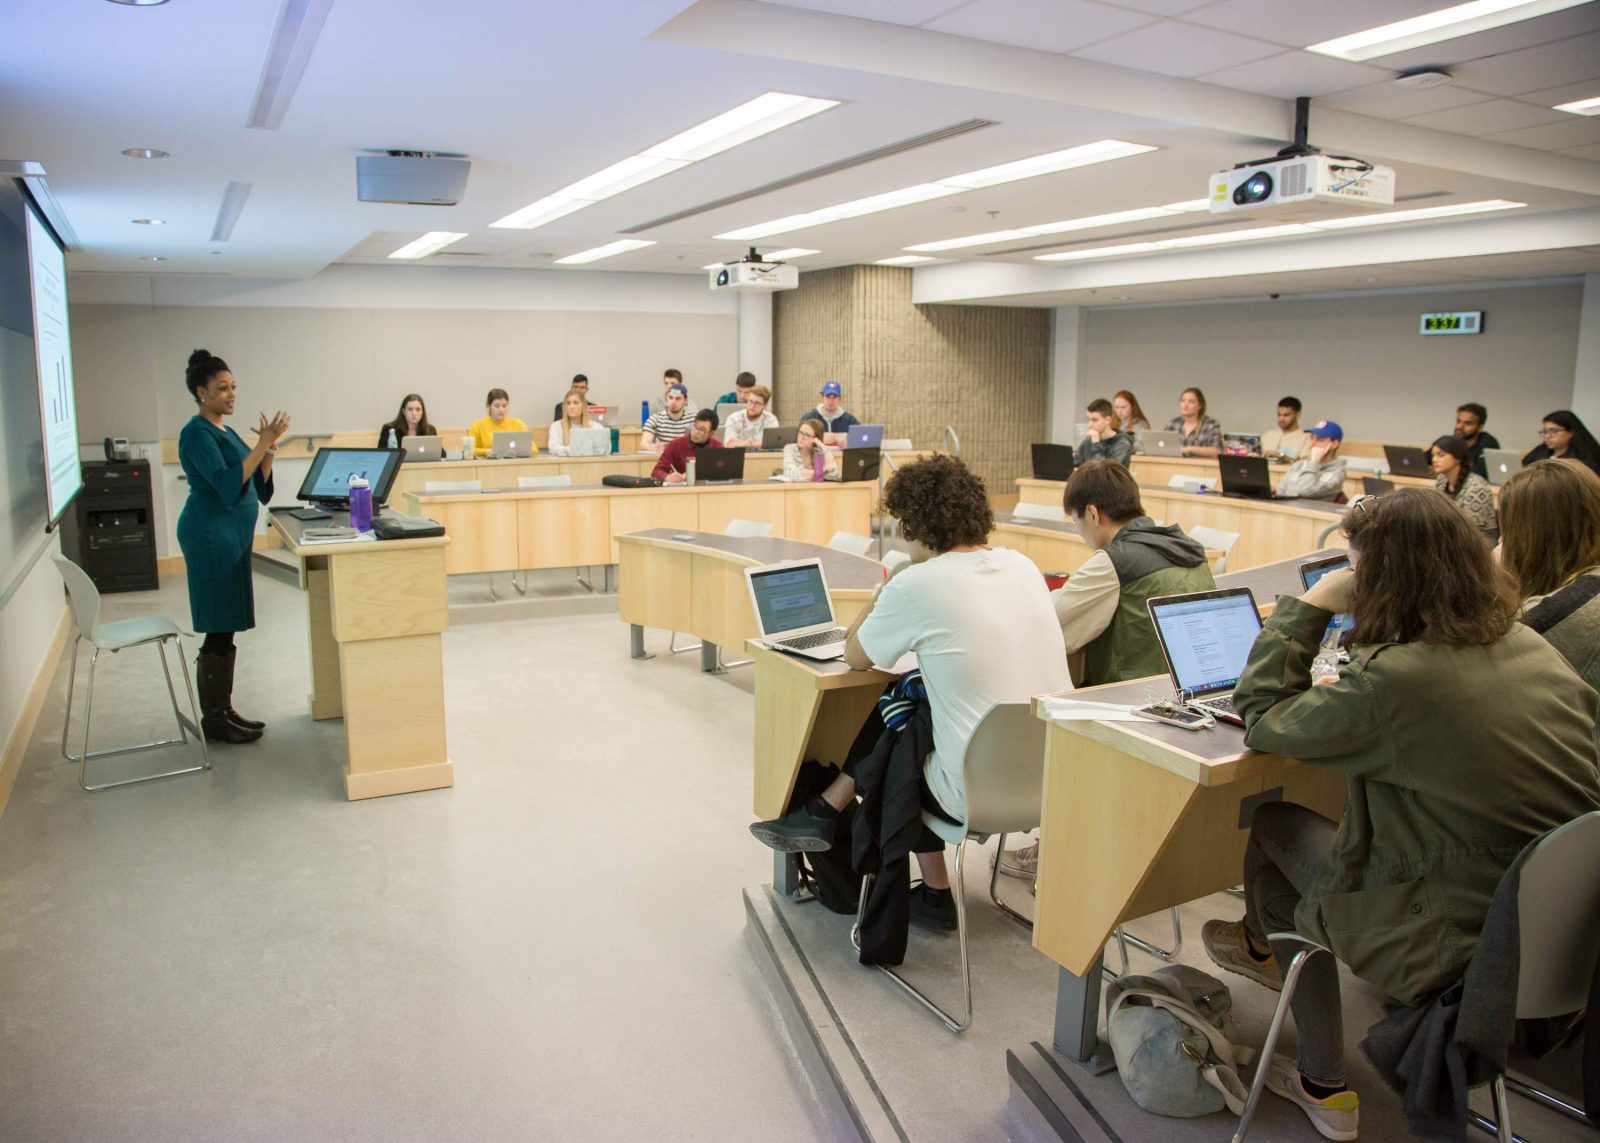 Woman stands at podium with a computer screen in small classroom. Rows of students sit at long, curved tables facing her.